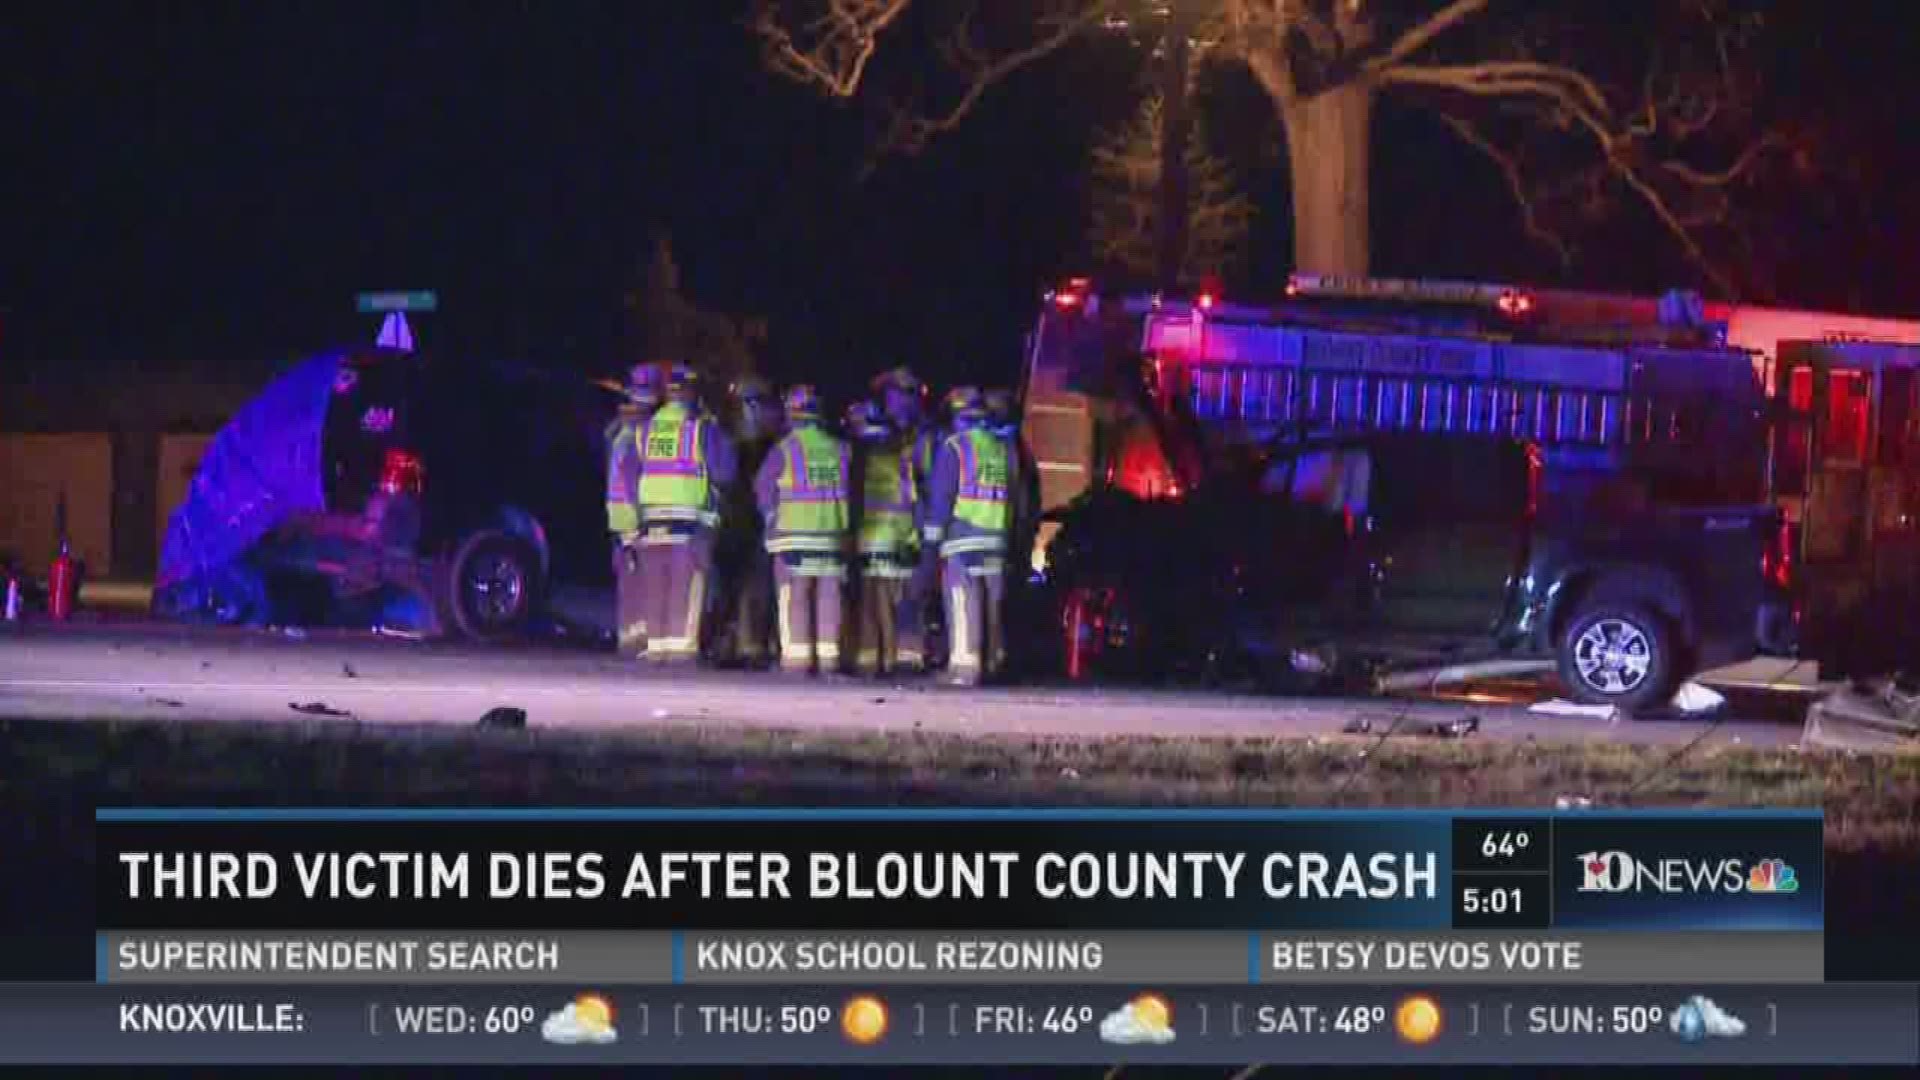 Jan. 31, 2017: According to UT Medical Center, a third person is dead after a crash in Blount County Saturday night.